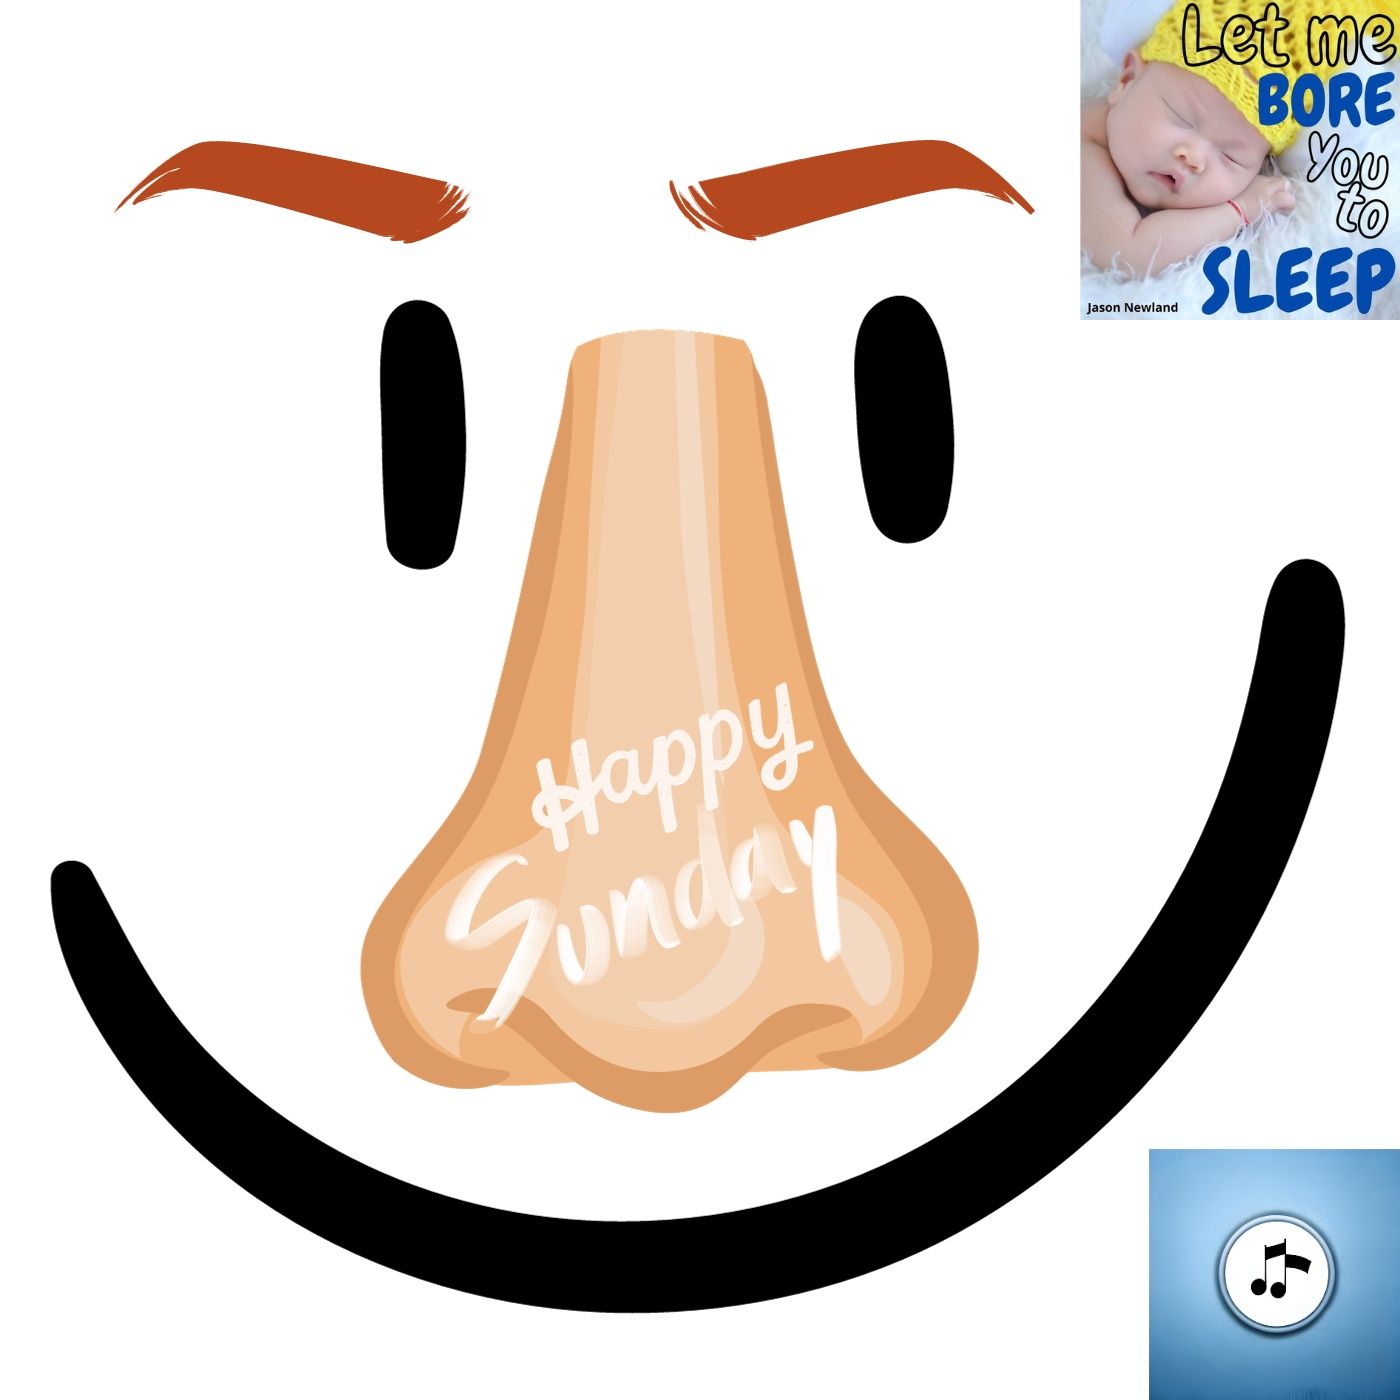 (music) #1049 - Happy Sunday - Let me bore you to sleep